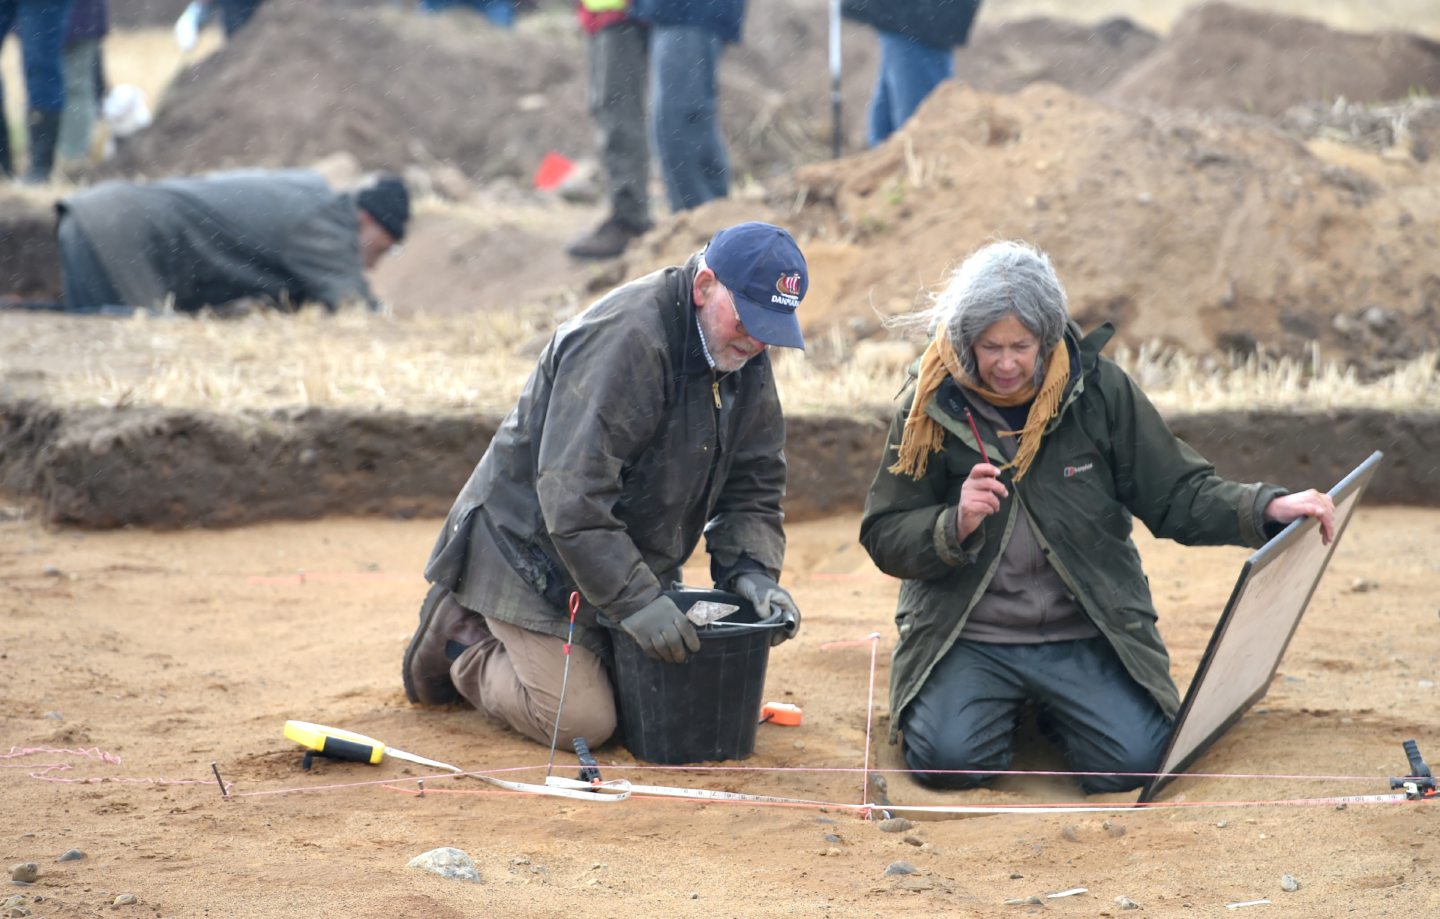 The public got a chance to view the archaeological dig as works continue and it nears its completion at the Tarradale  burial site near Muir of Ord. Picture by Sandy McCook